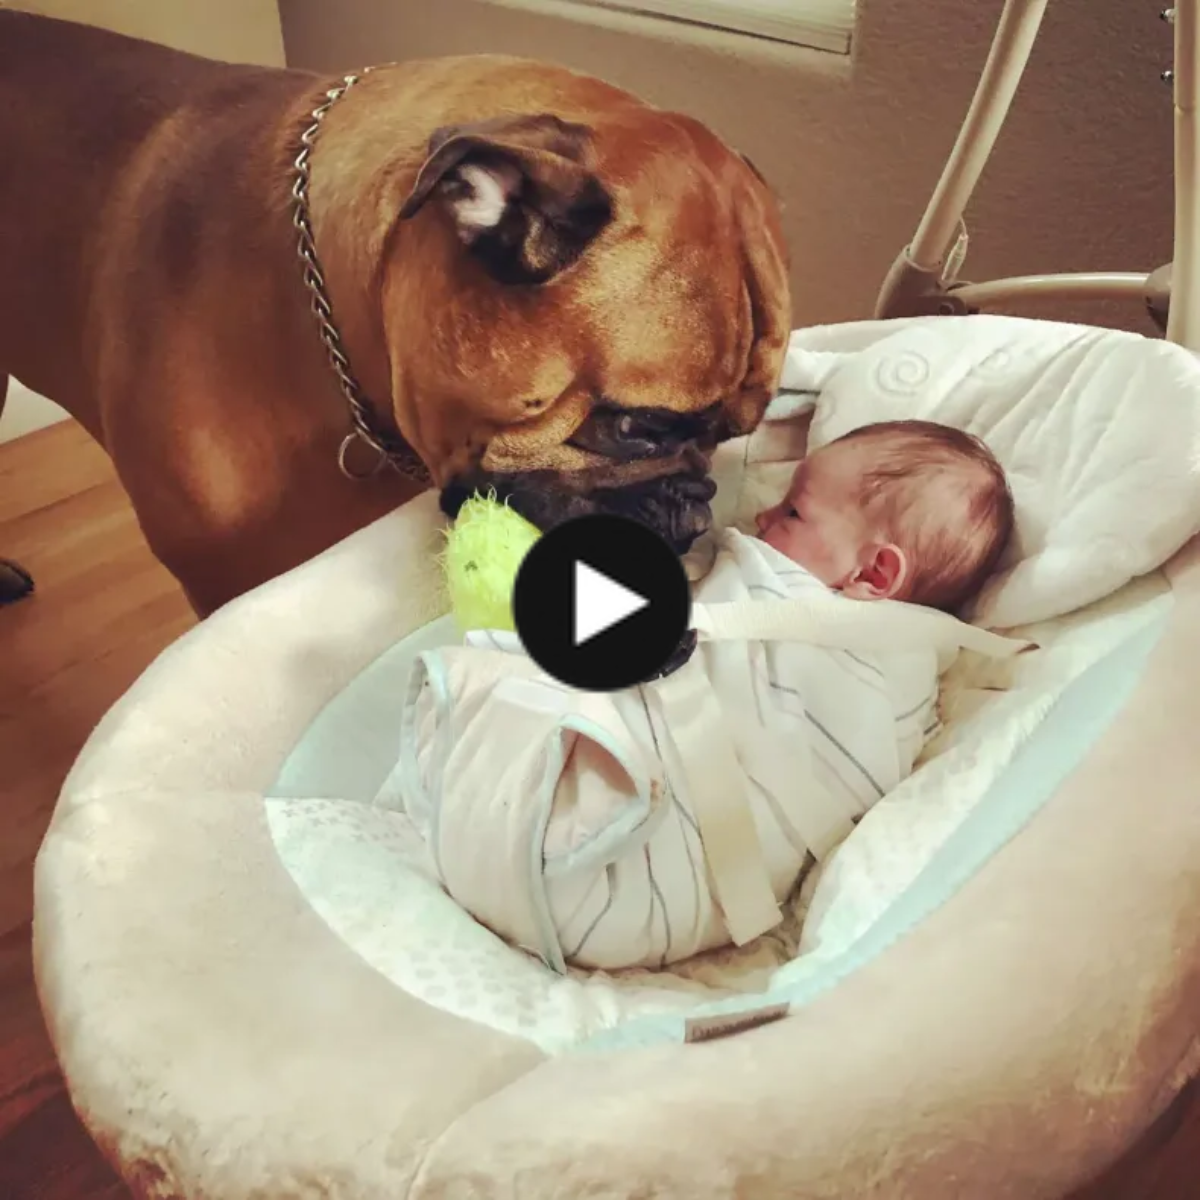 Pit Bull’s Touching Act of Giving a Child Its Favorite Toy During Their First Meeting: A Heartfelt Bond